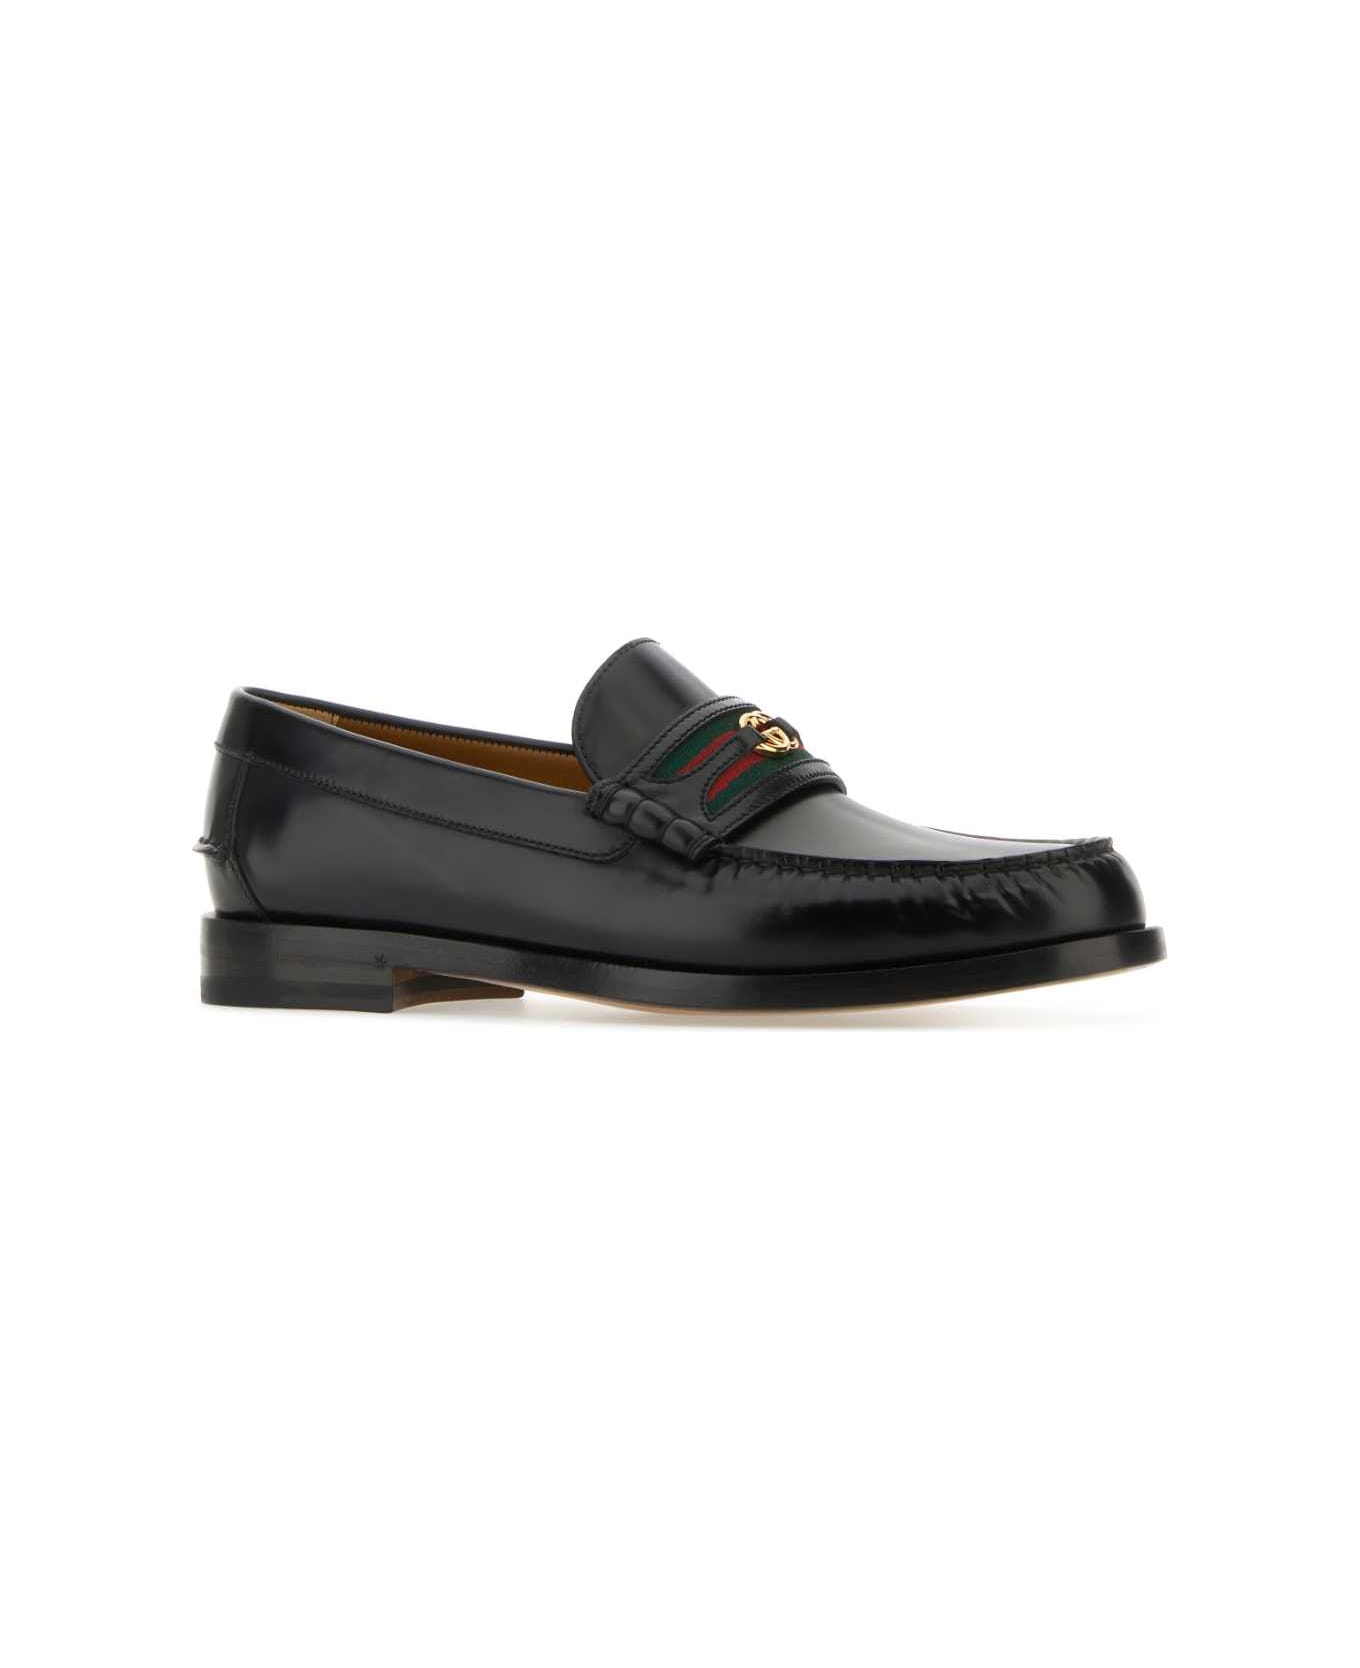 Gucci Black Leather 1953 Loafers - Black